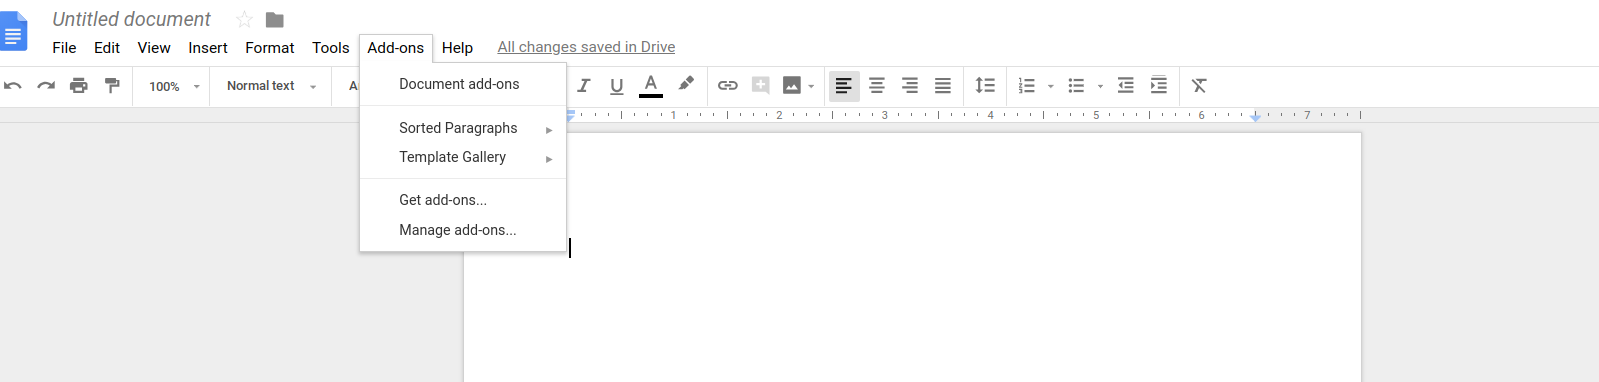 Installed Add-ons in Google Docs